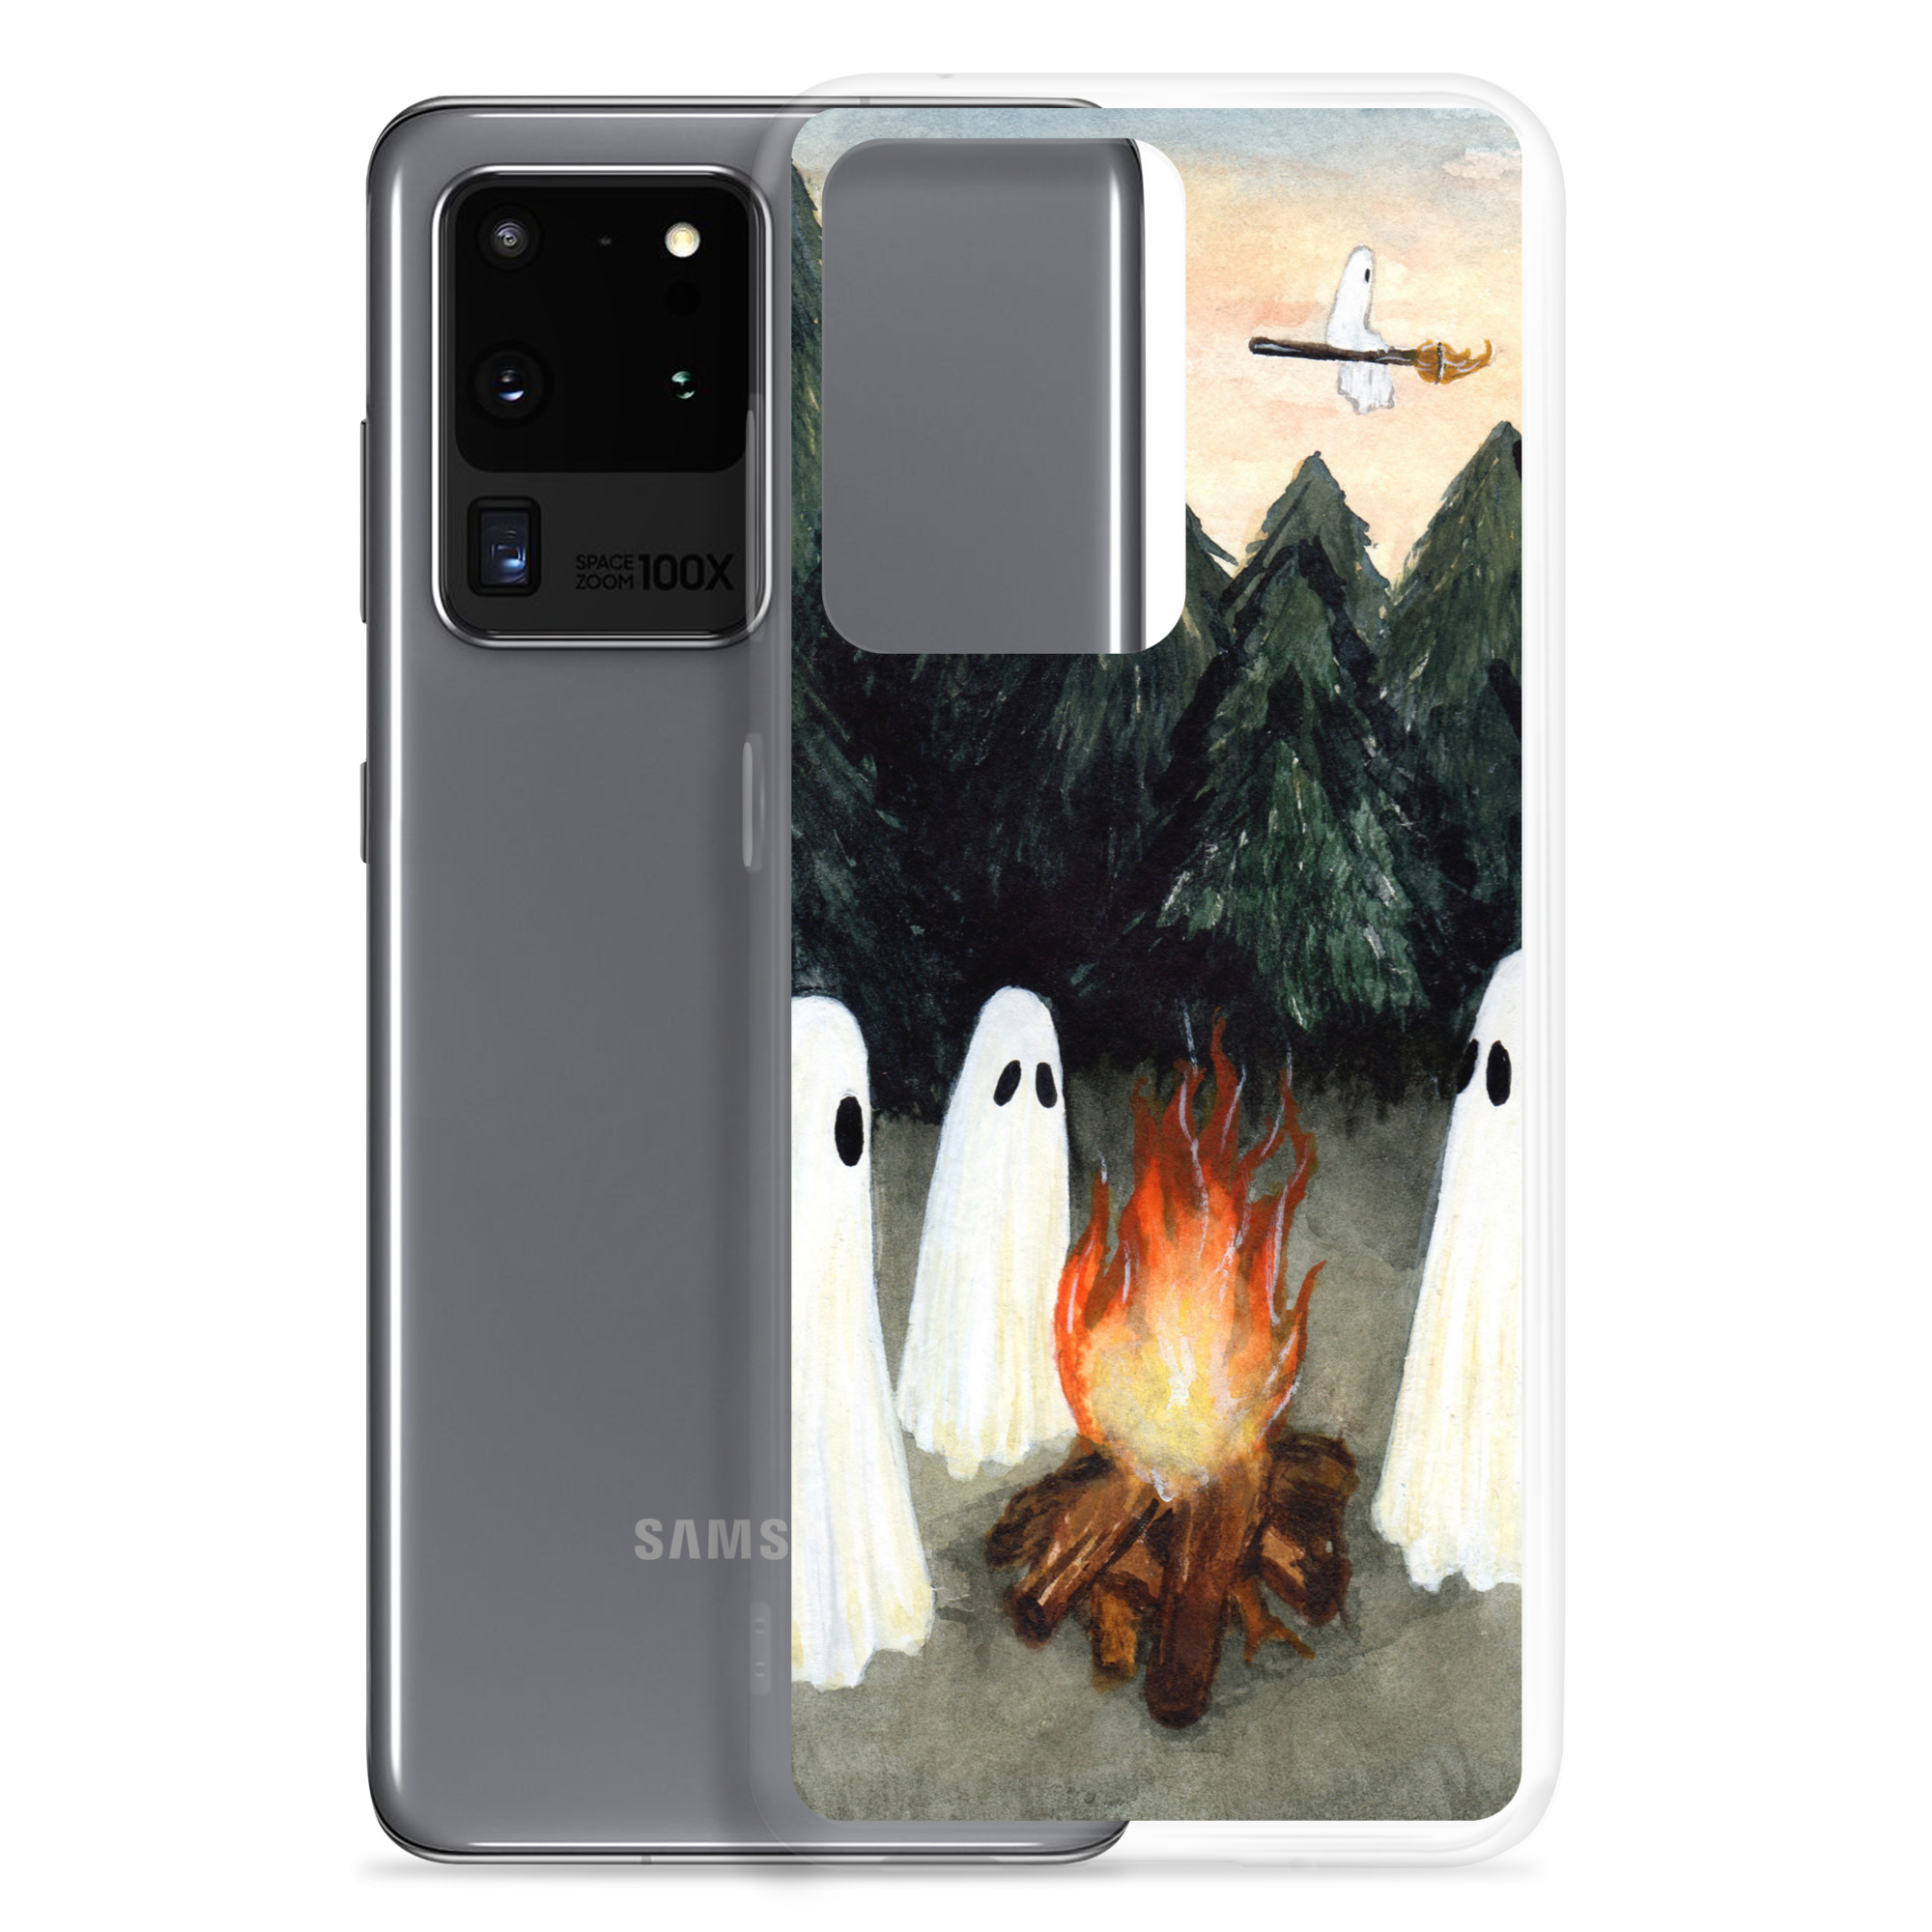 clear-case-for-samsung-samsung-galaxy-s20-ultra-case-with-phone-642b48474194e.jpg